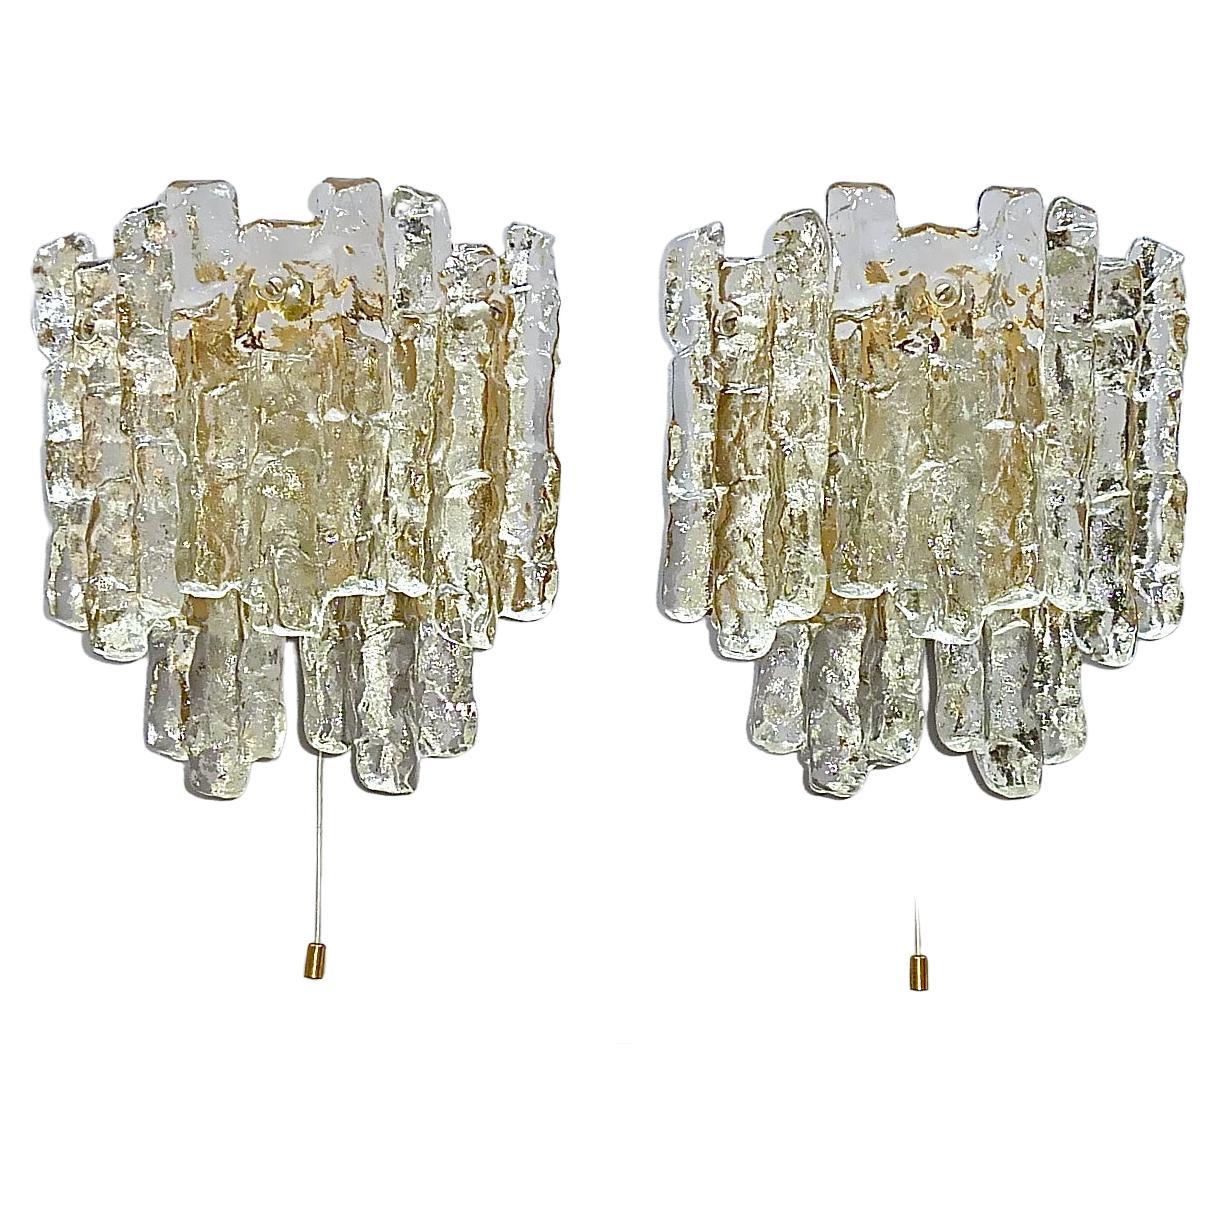 Signed Pair J.T. Kalmar Sconces Large Golden Wall Lamps Murano Ice Glass 1960s For Sale